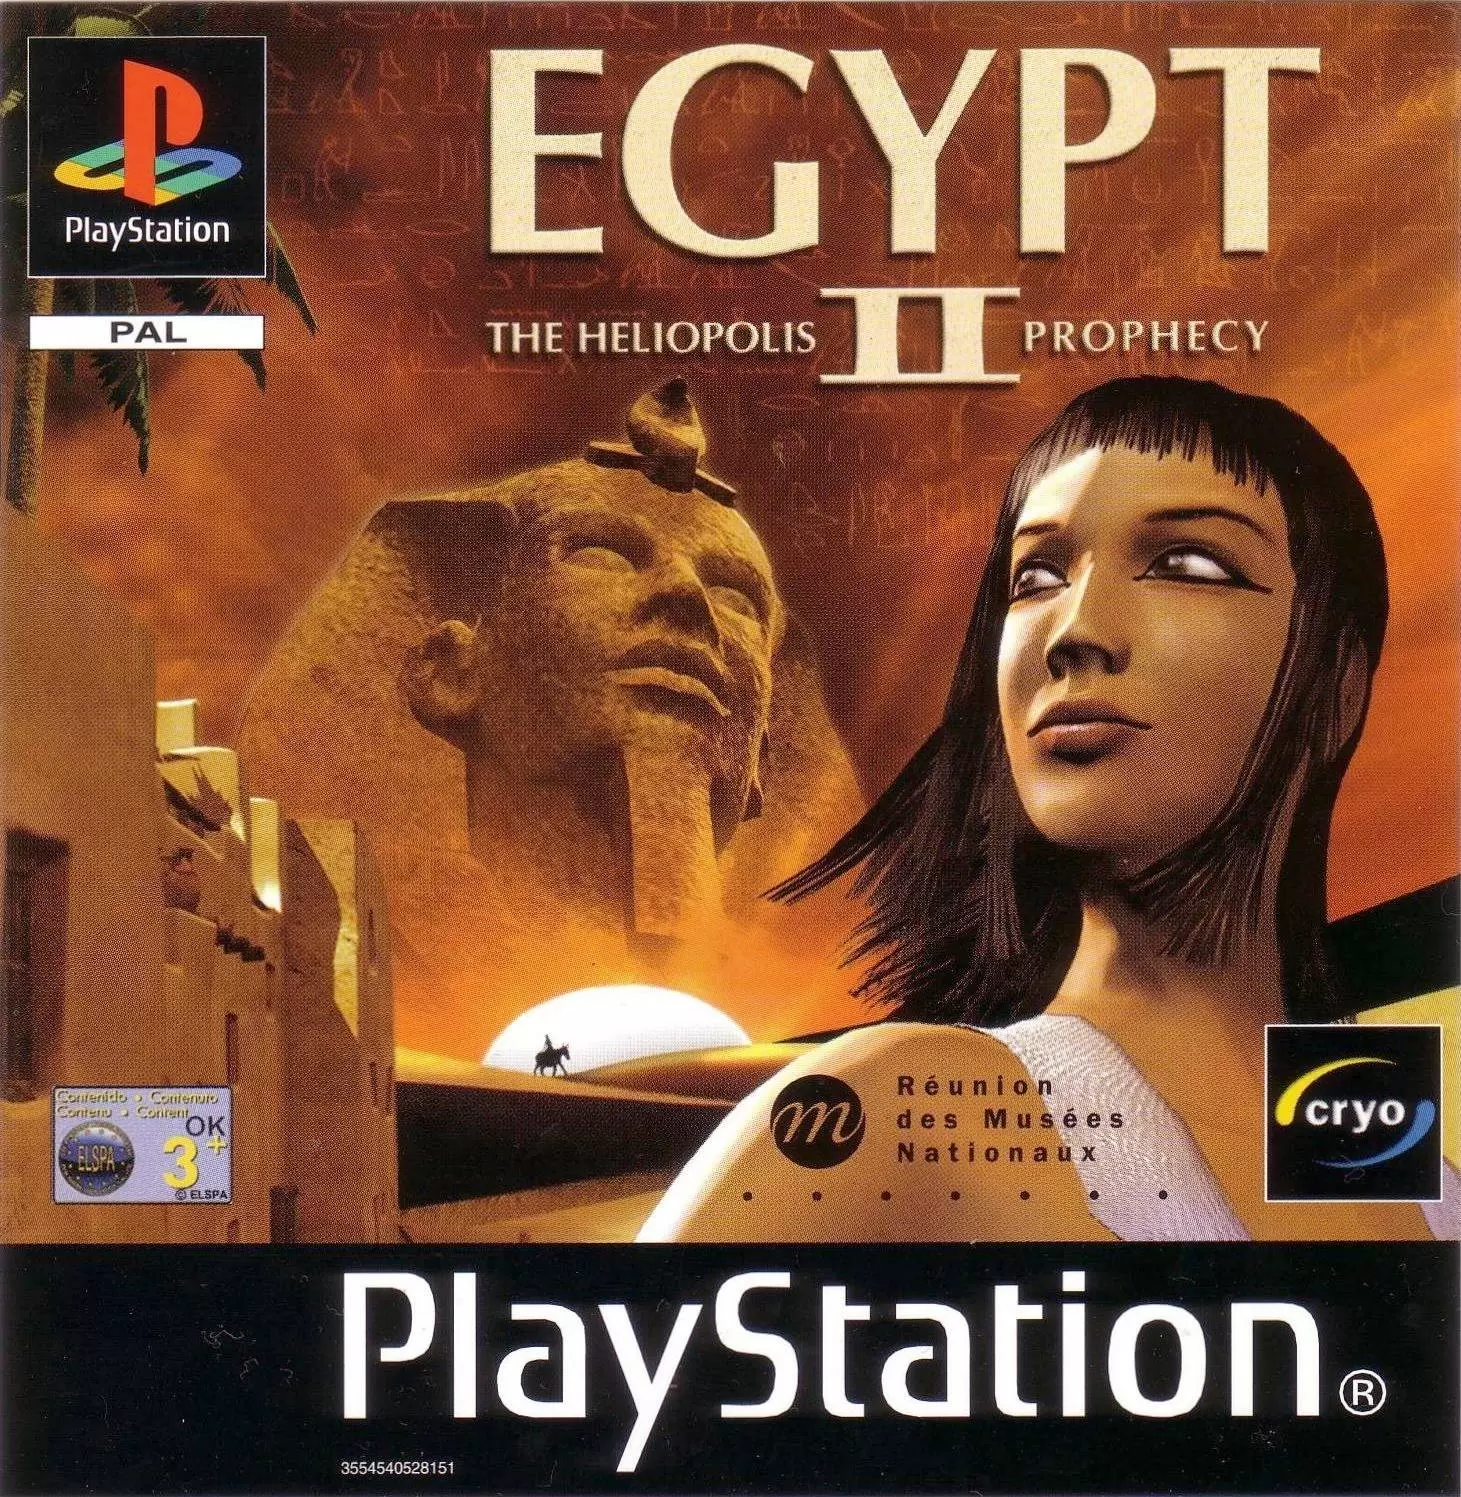 Playstation games - Egypt II: The Heliopolis Prophecy